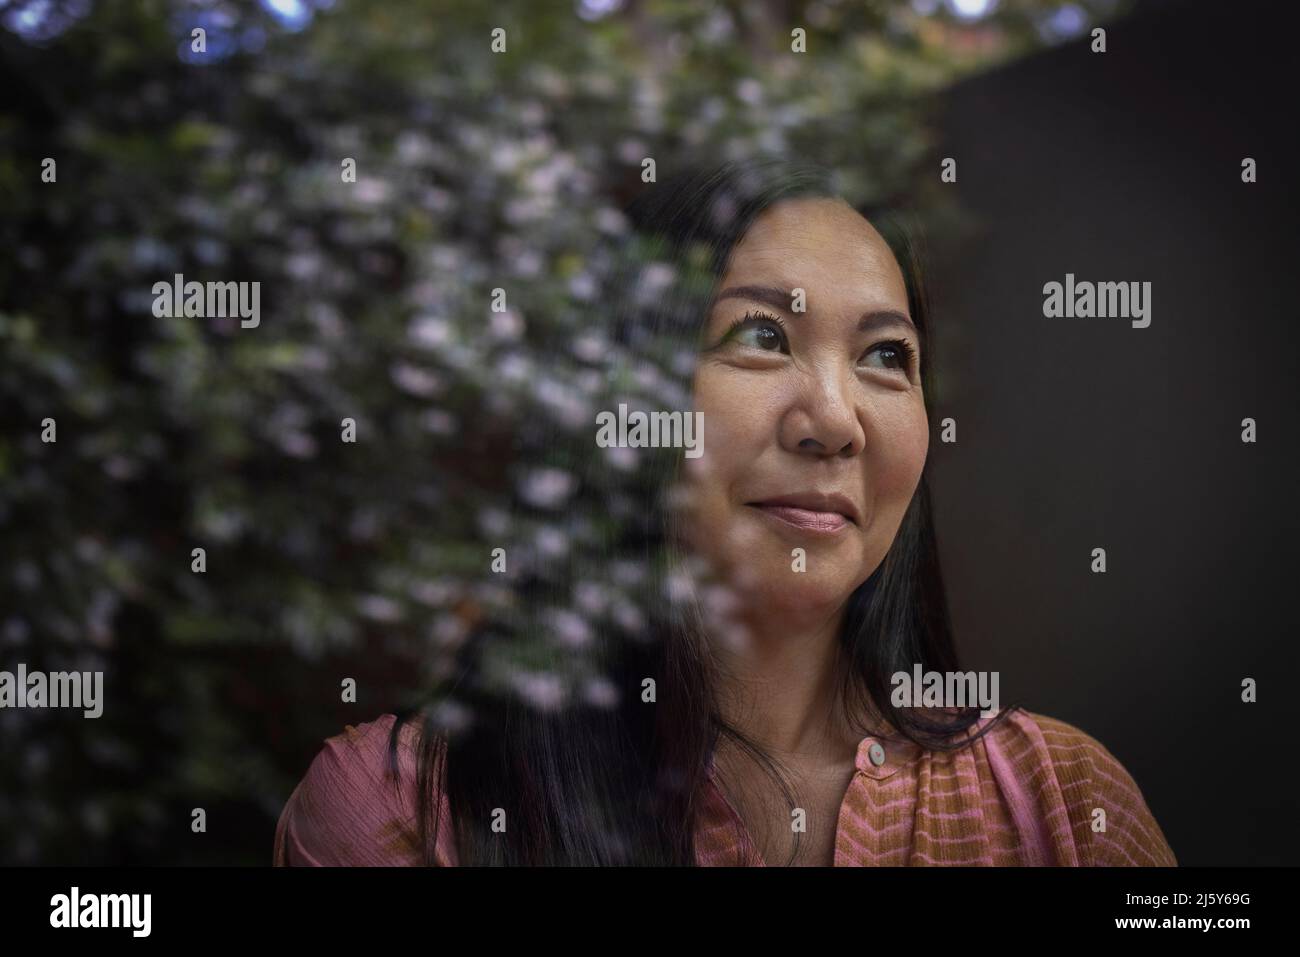 Close up smiling woman looking out window with reflection Stock Photo